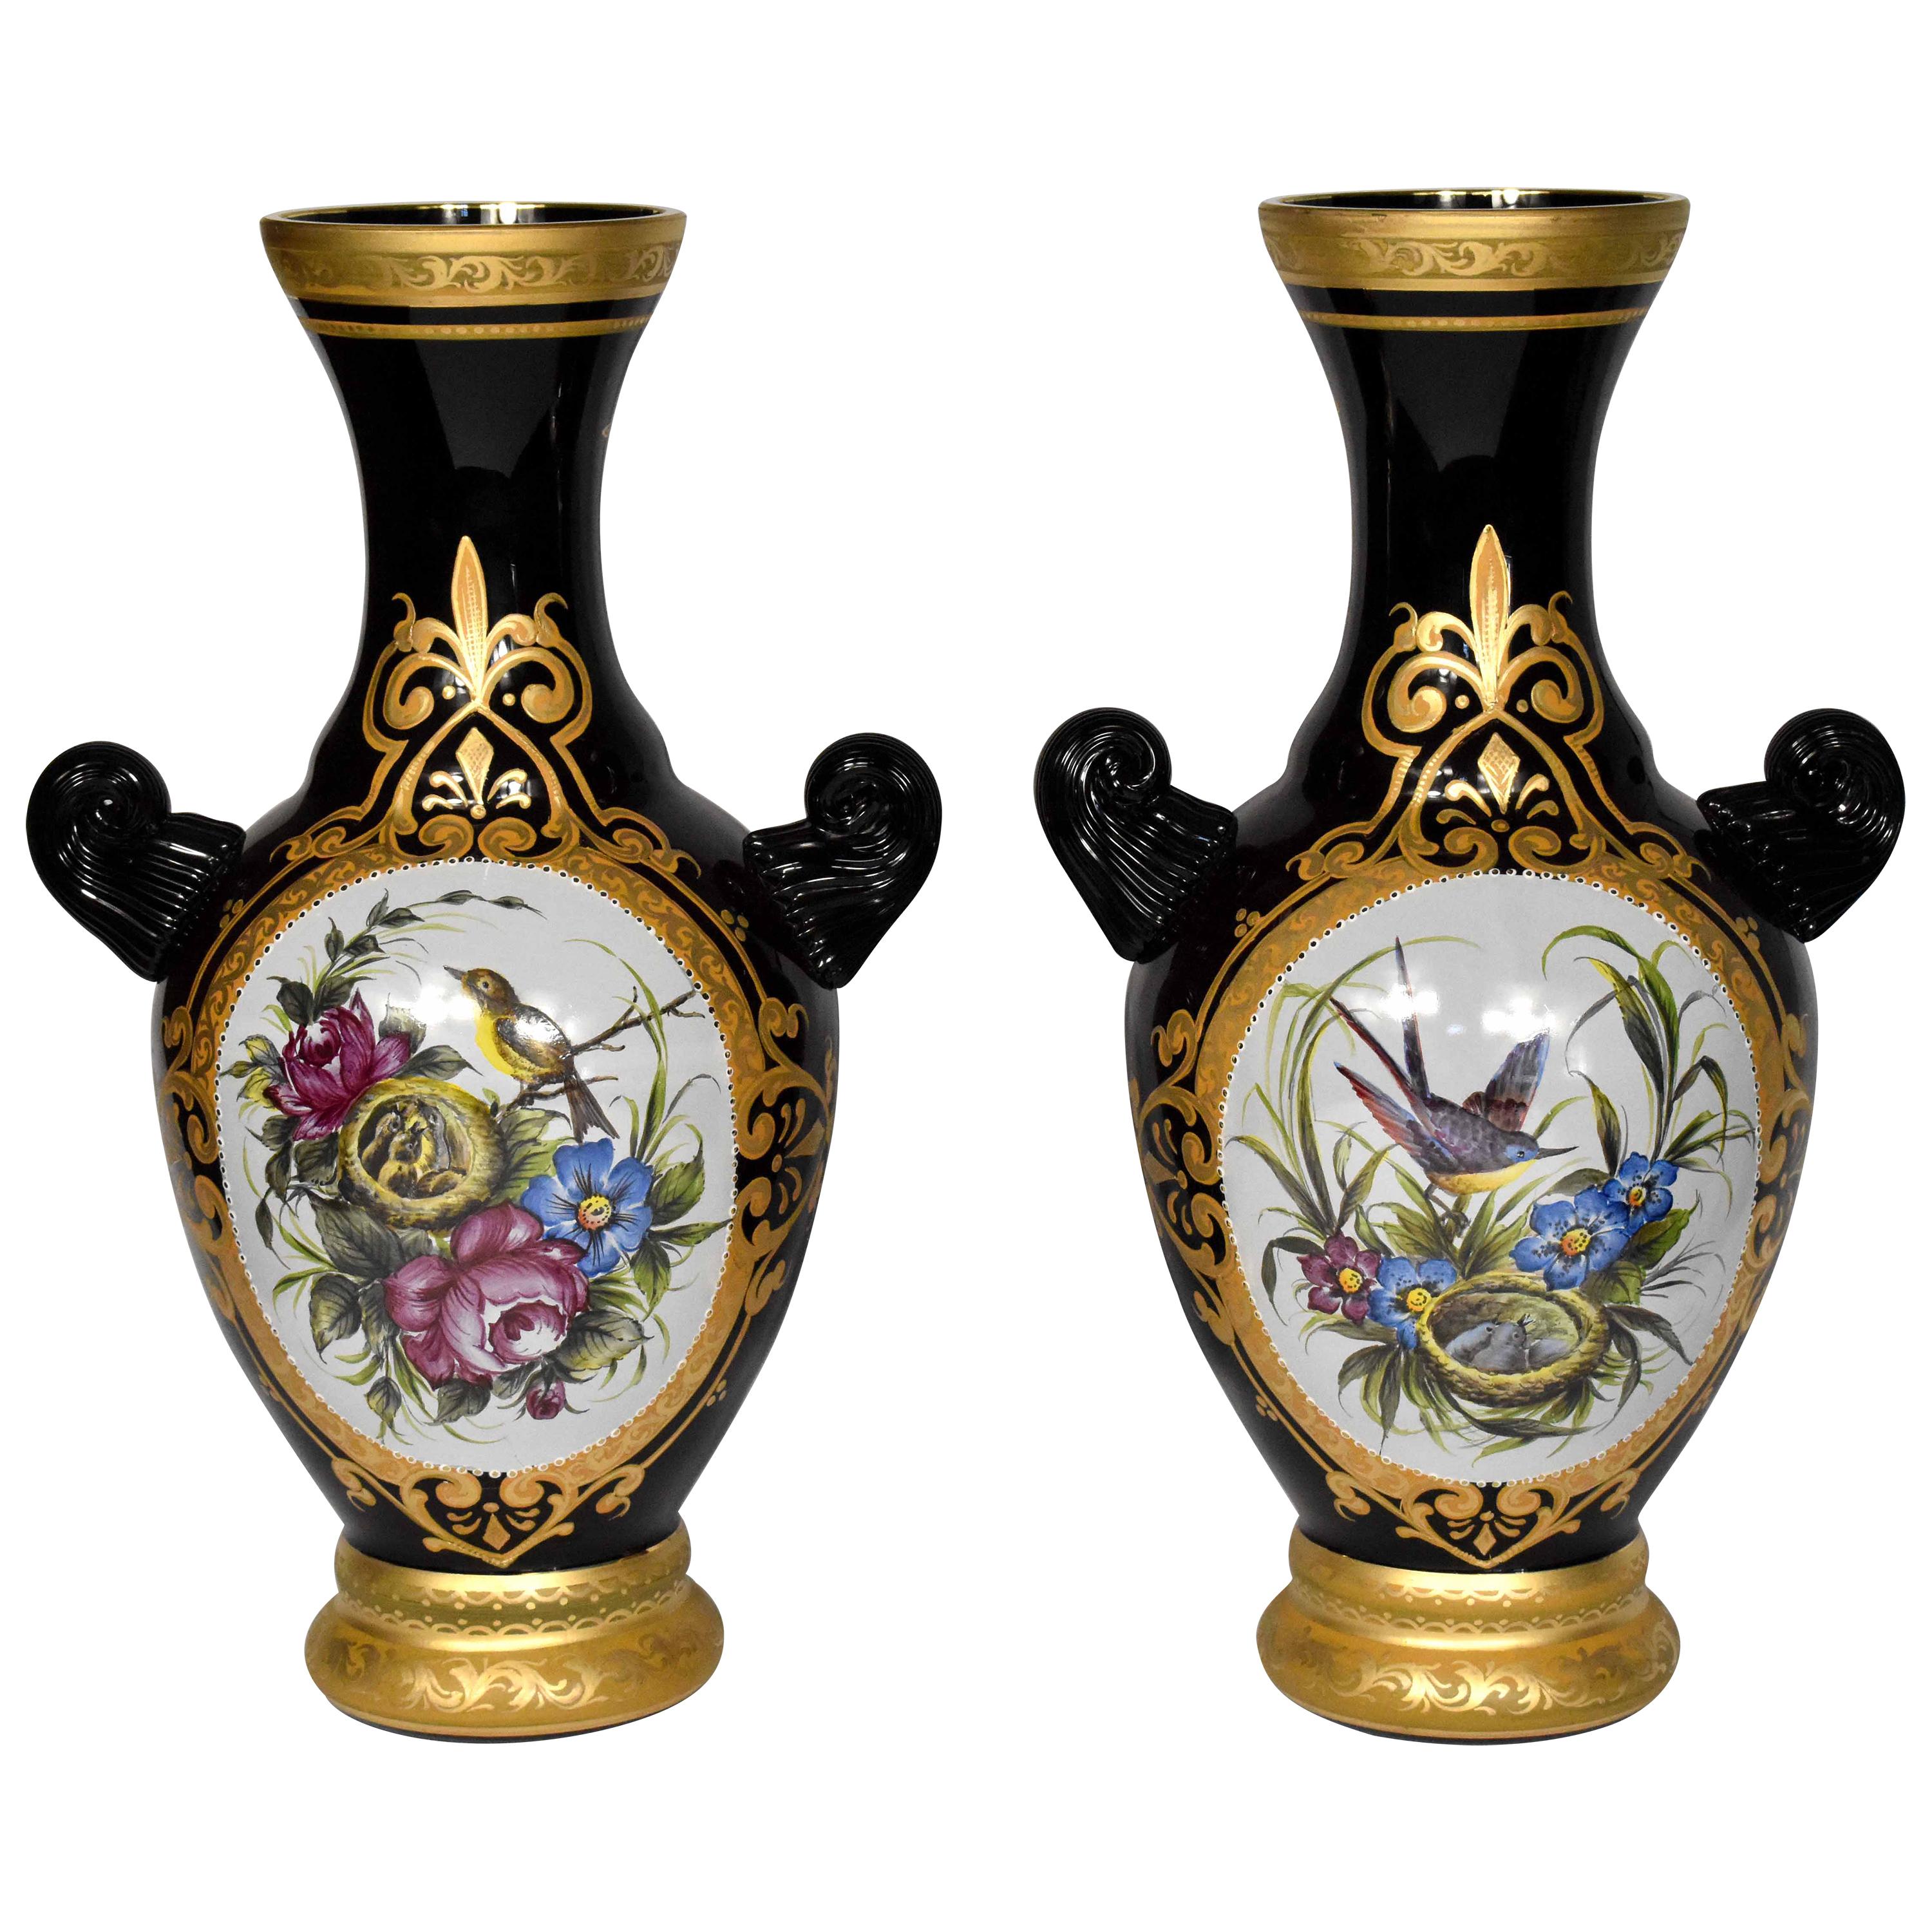 Pair of Hand, Painted Vases, 19th Century Style Bohemian Glass